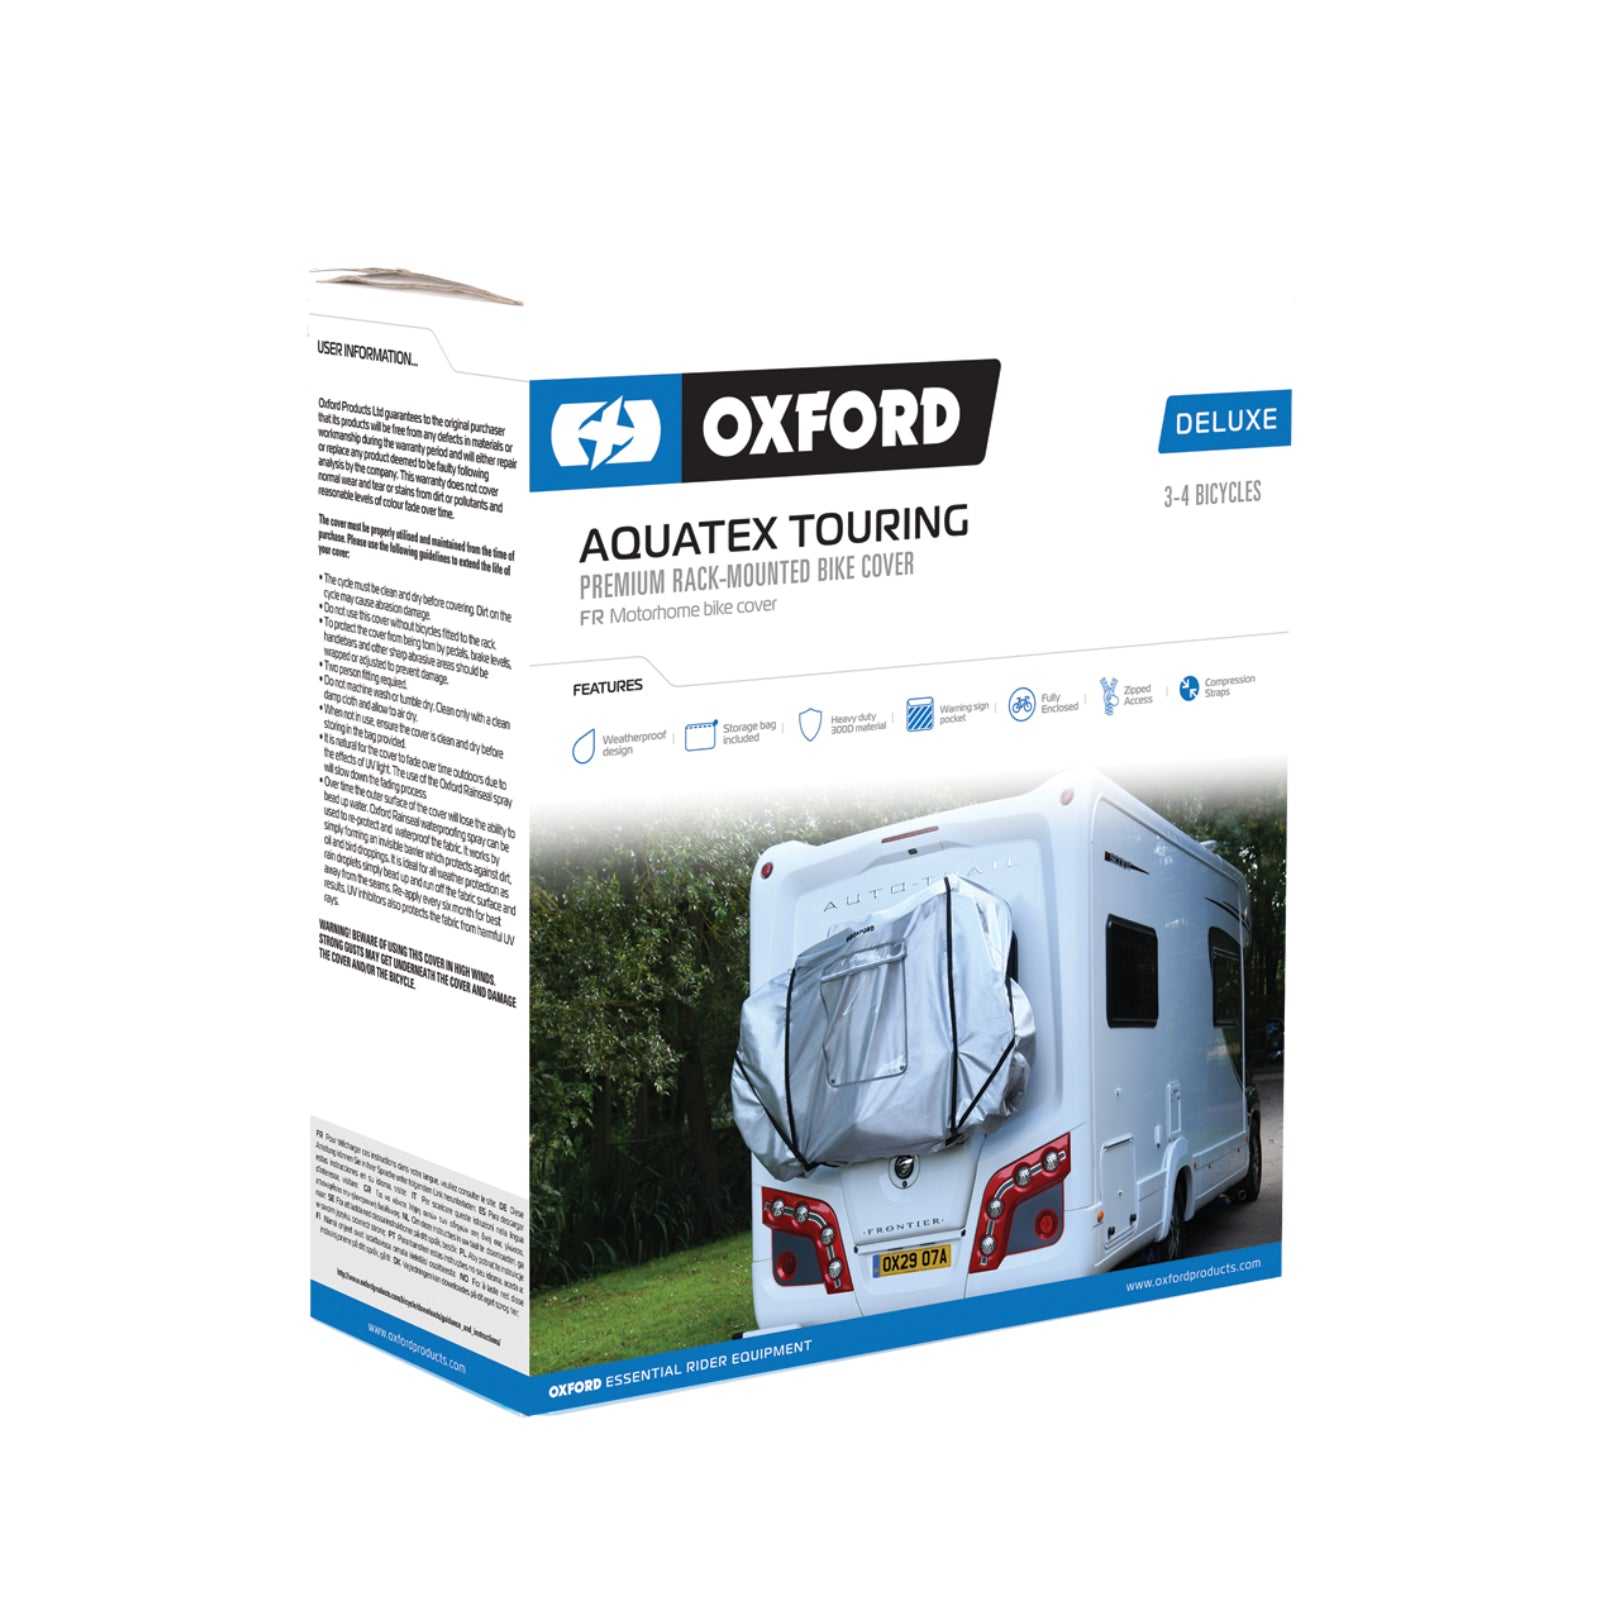 Oxford, Oxford Aquatex Touring Deluxe Bike Cover for 3-4 Bikes